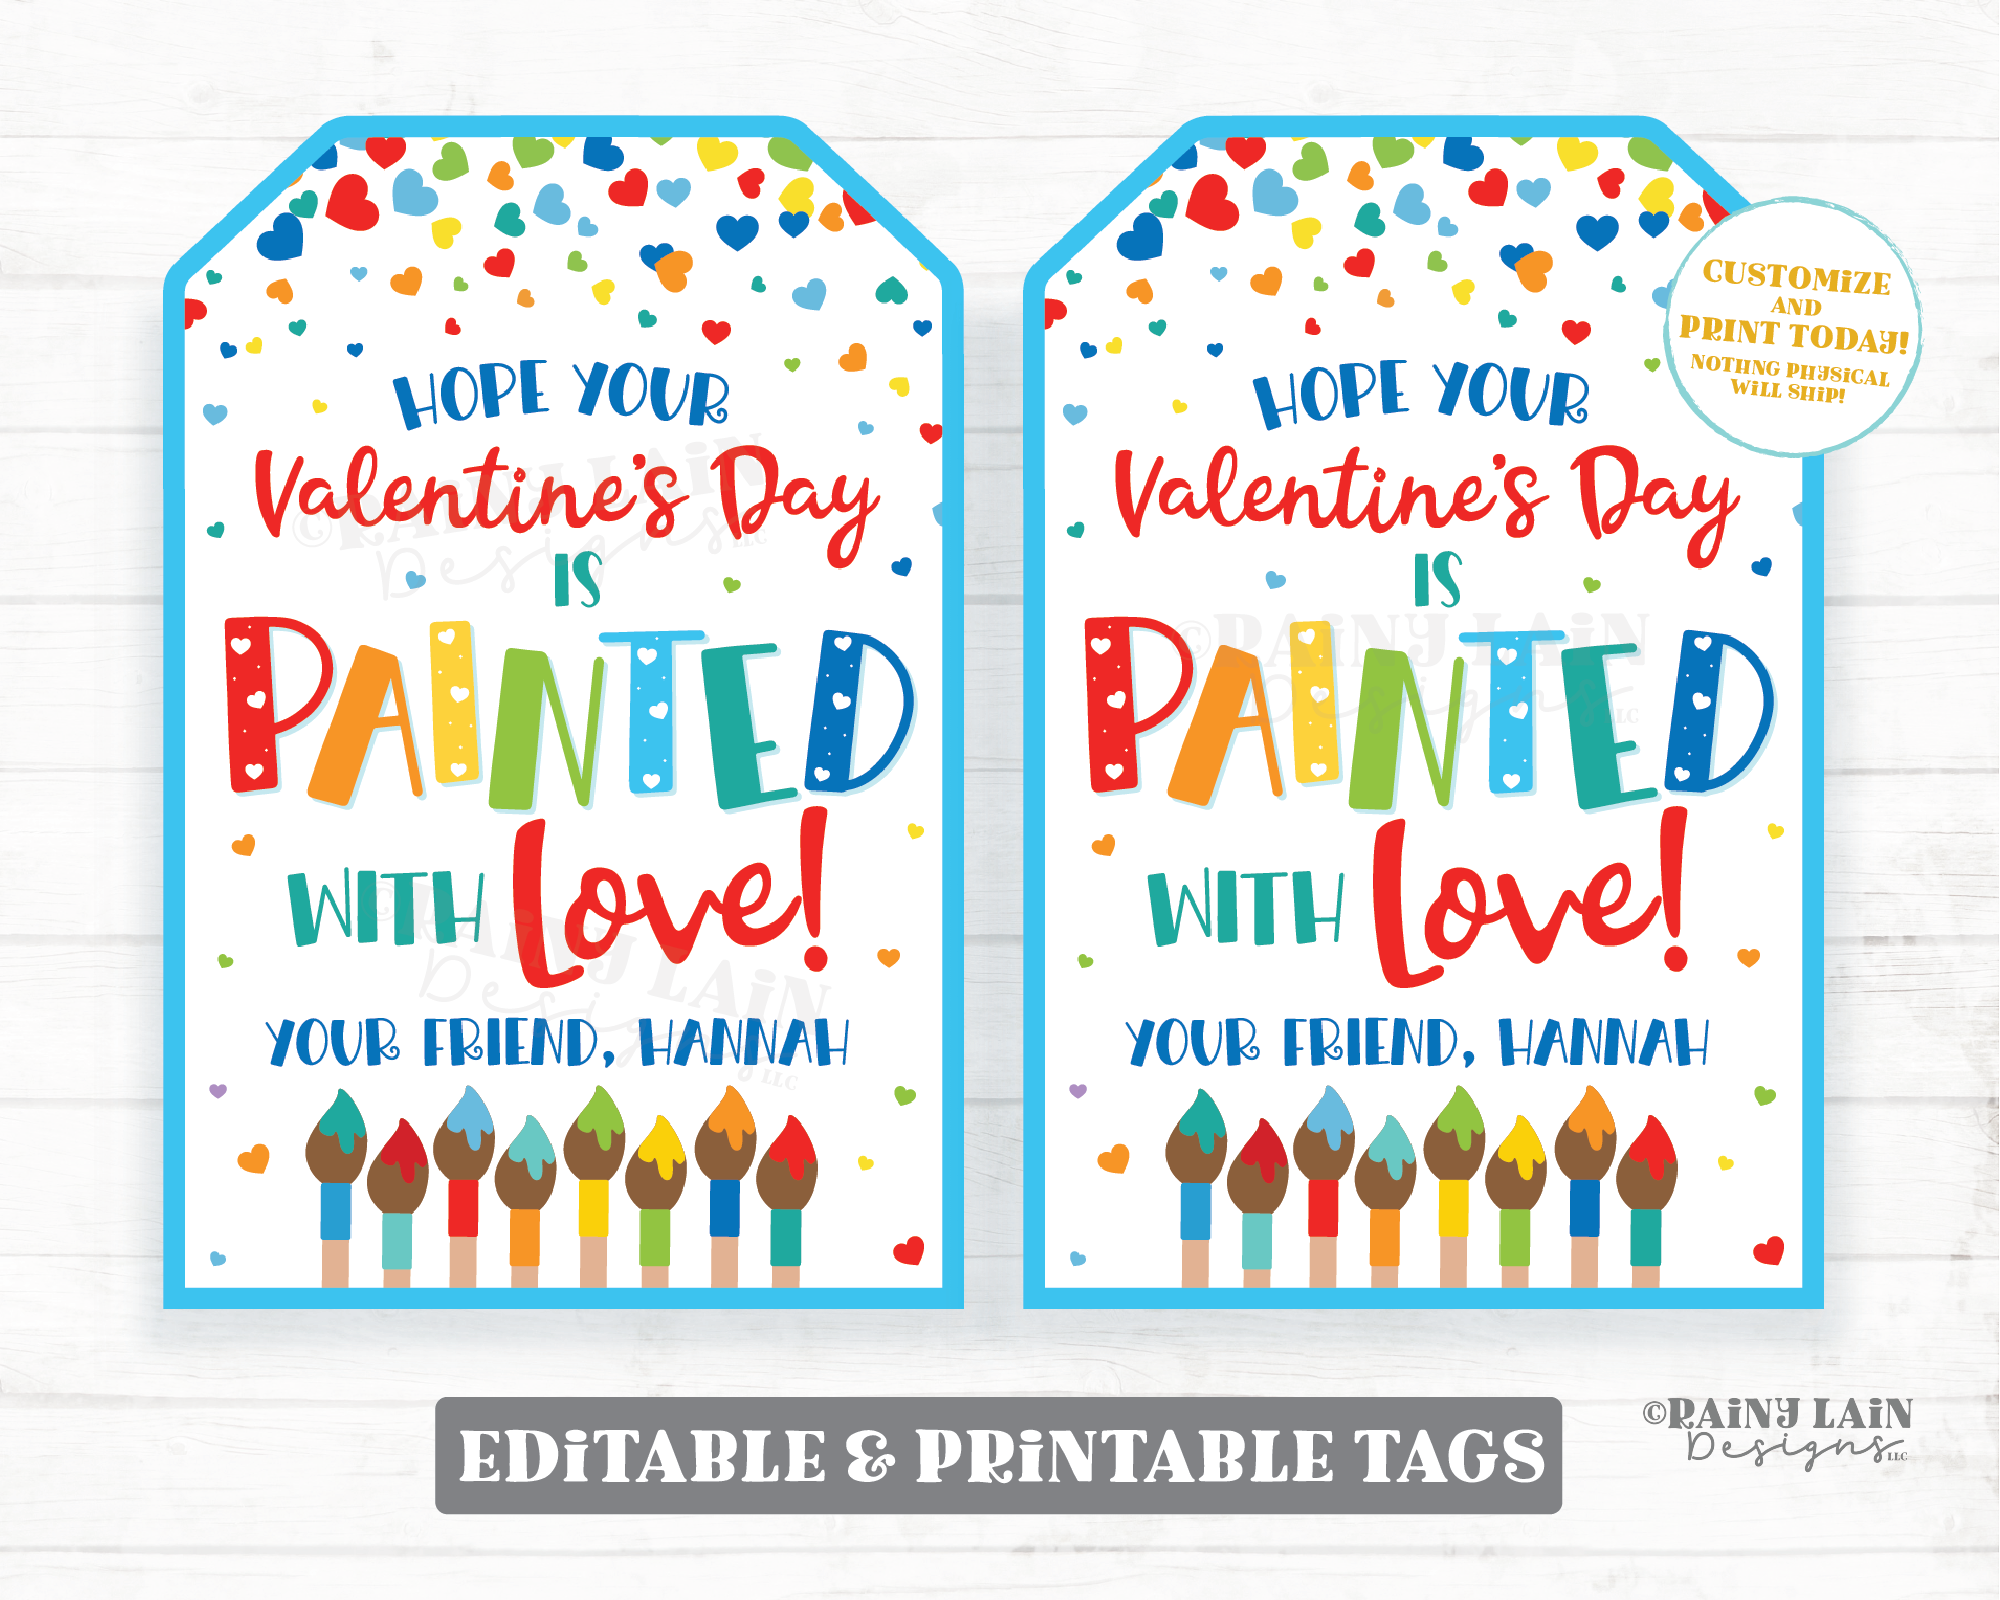 Painted with Love Valentine Paint Brush Painting Watercolor Fun Valentine's day Editable Classroom Preschool Printable Kids Non-Candy Tag